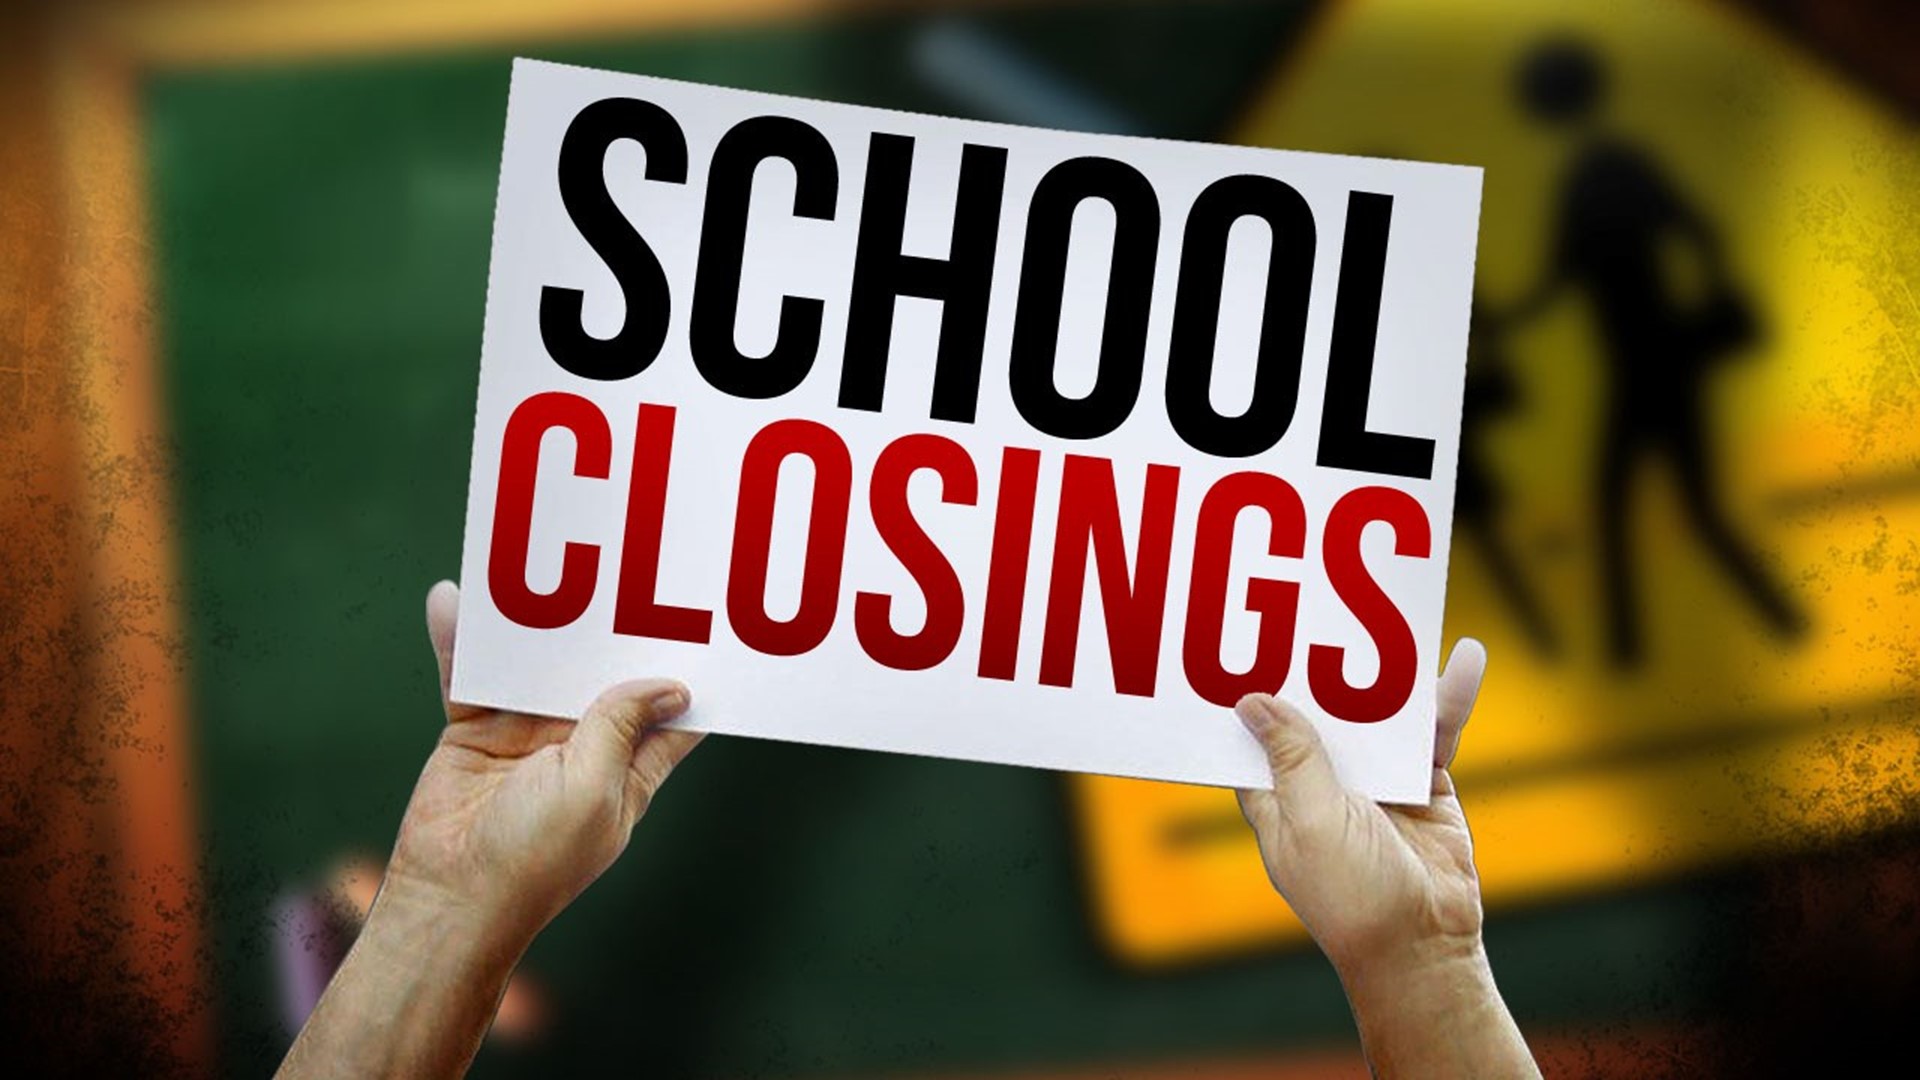 School closings and cancellations for Friday, Aug. 28